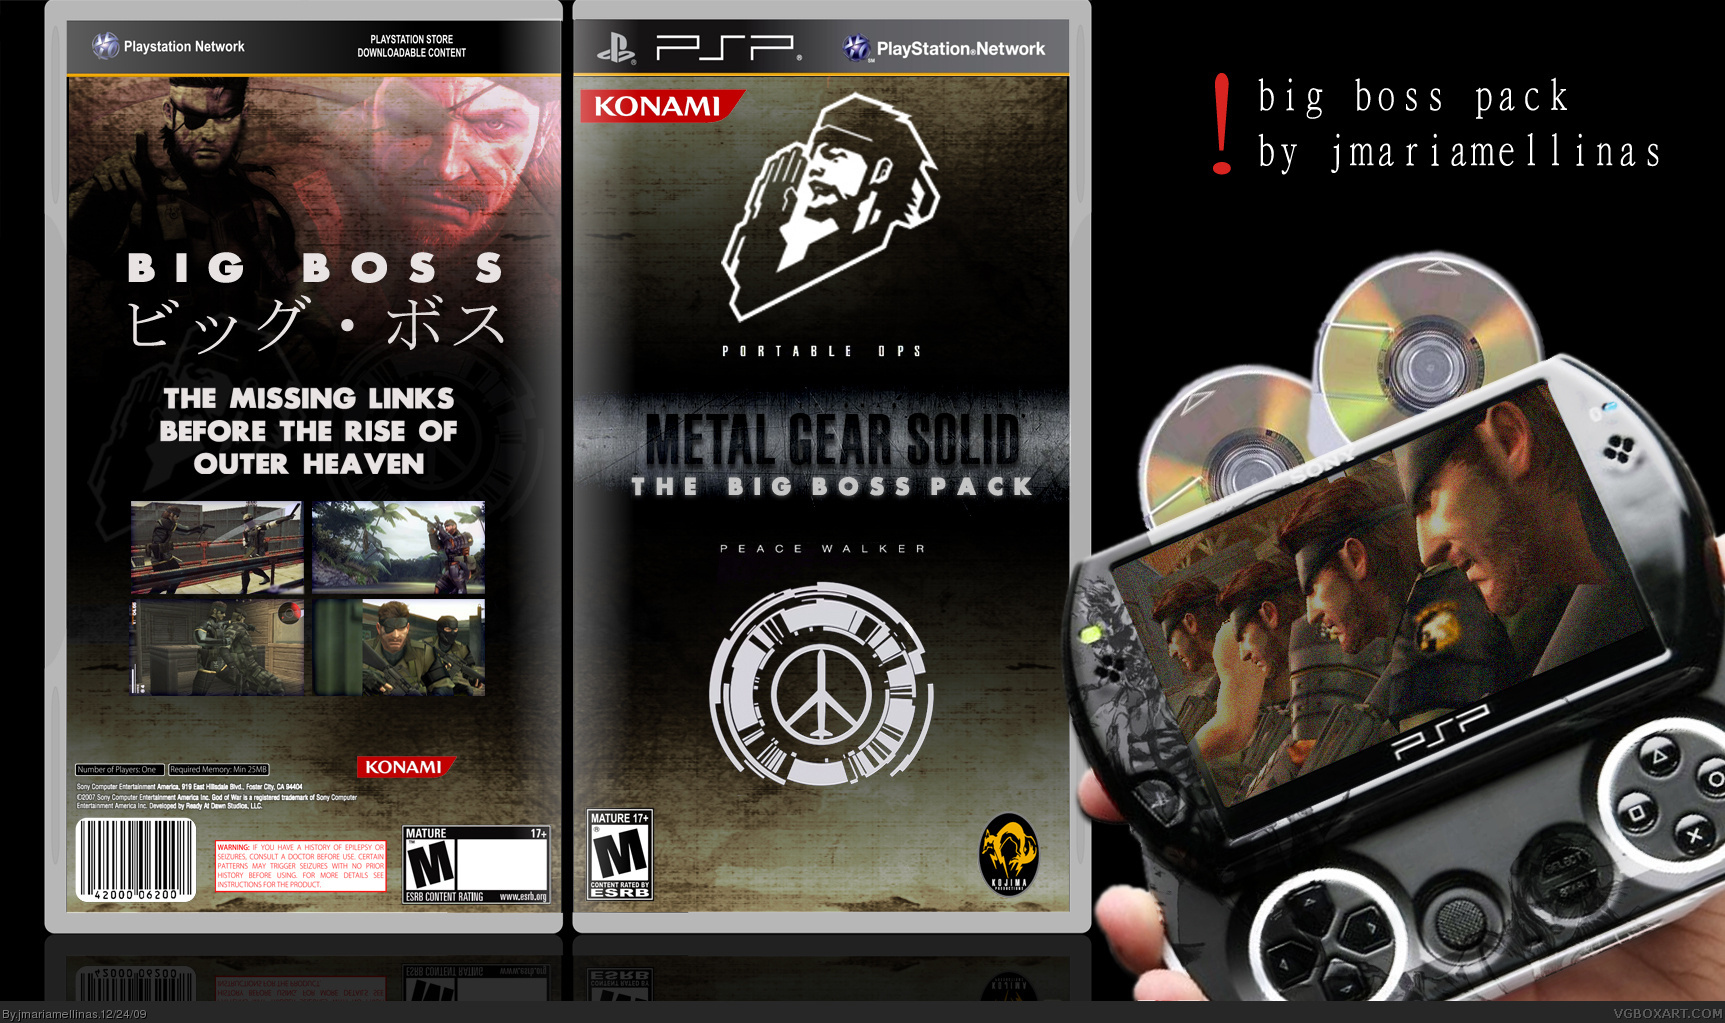 Metal Gear Solid: The Big Boss Pack box cover